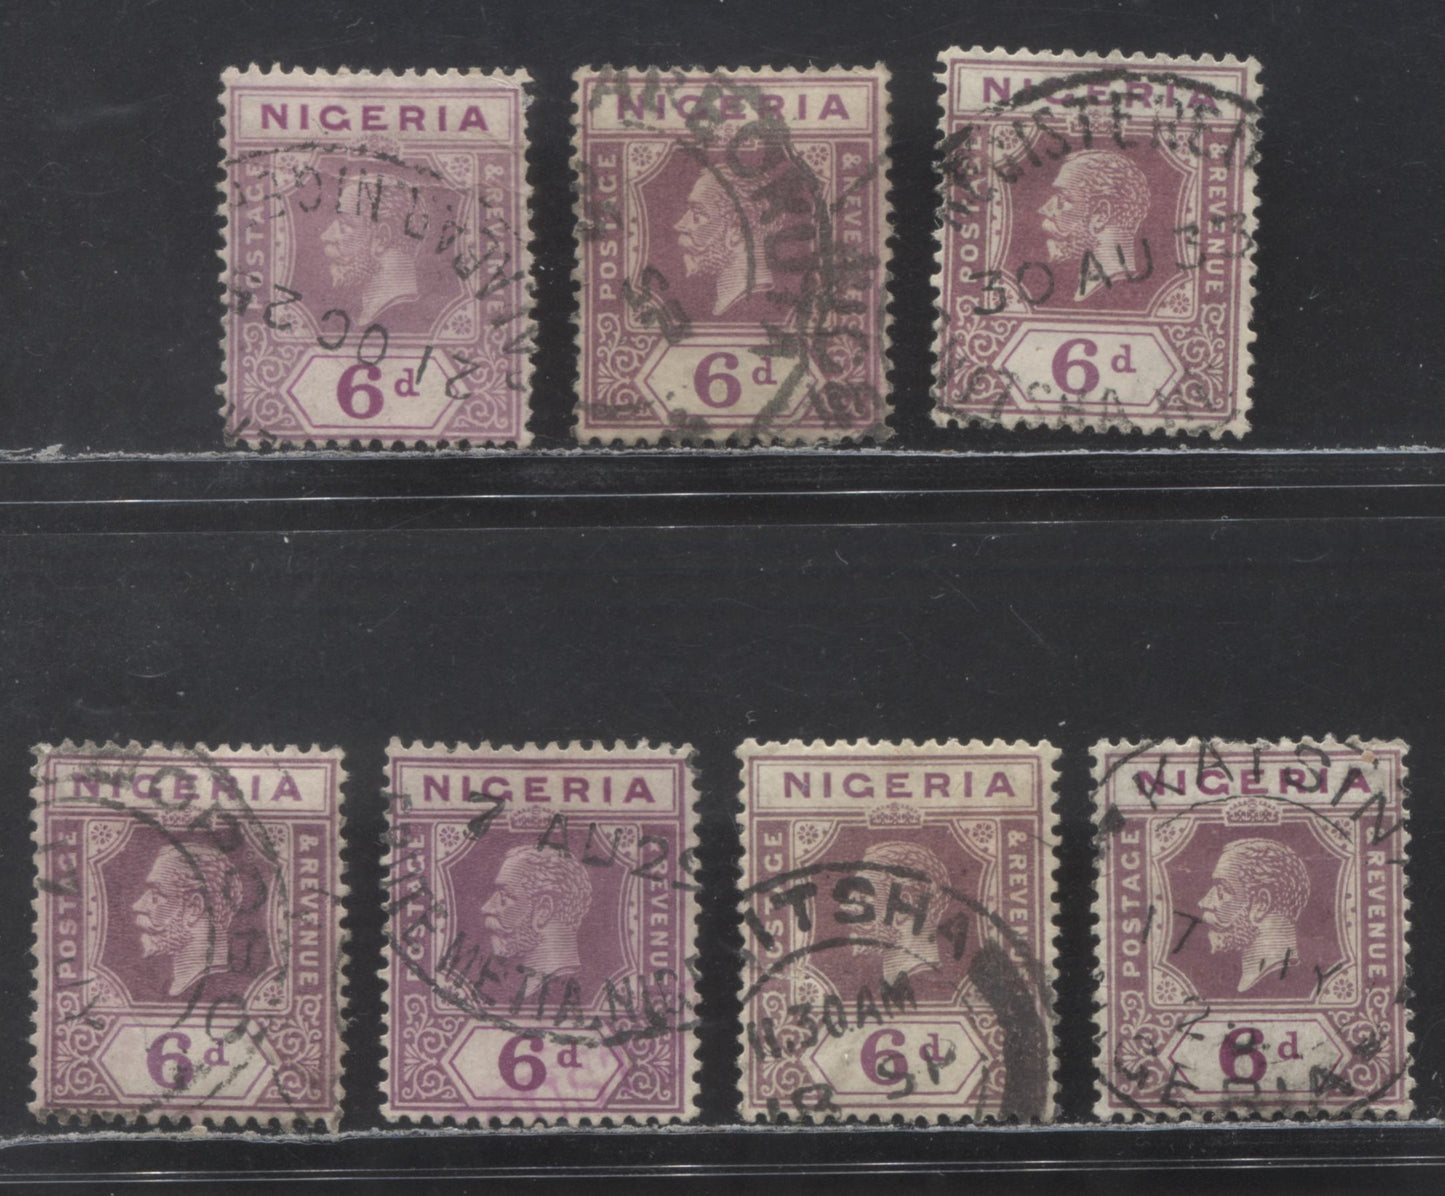 Nigeria SC# 28 (SG# 25a) 6d 1921 - 1933 King George V Imperium Key Plate Issue, Script CA Watermark, Die 2 All With Smaller Town Or Village Cancels, 7 F/VF Used Singles, Click on Listing to See ALL Pictures, 2022 Scott Classic Cat. $56 USD